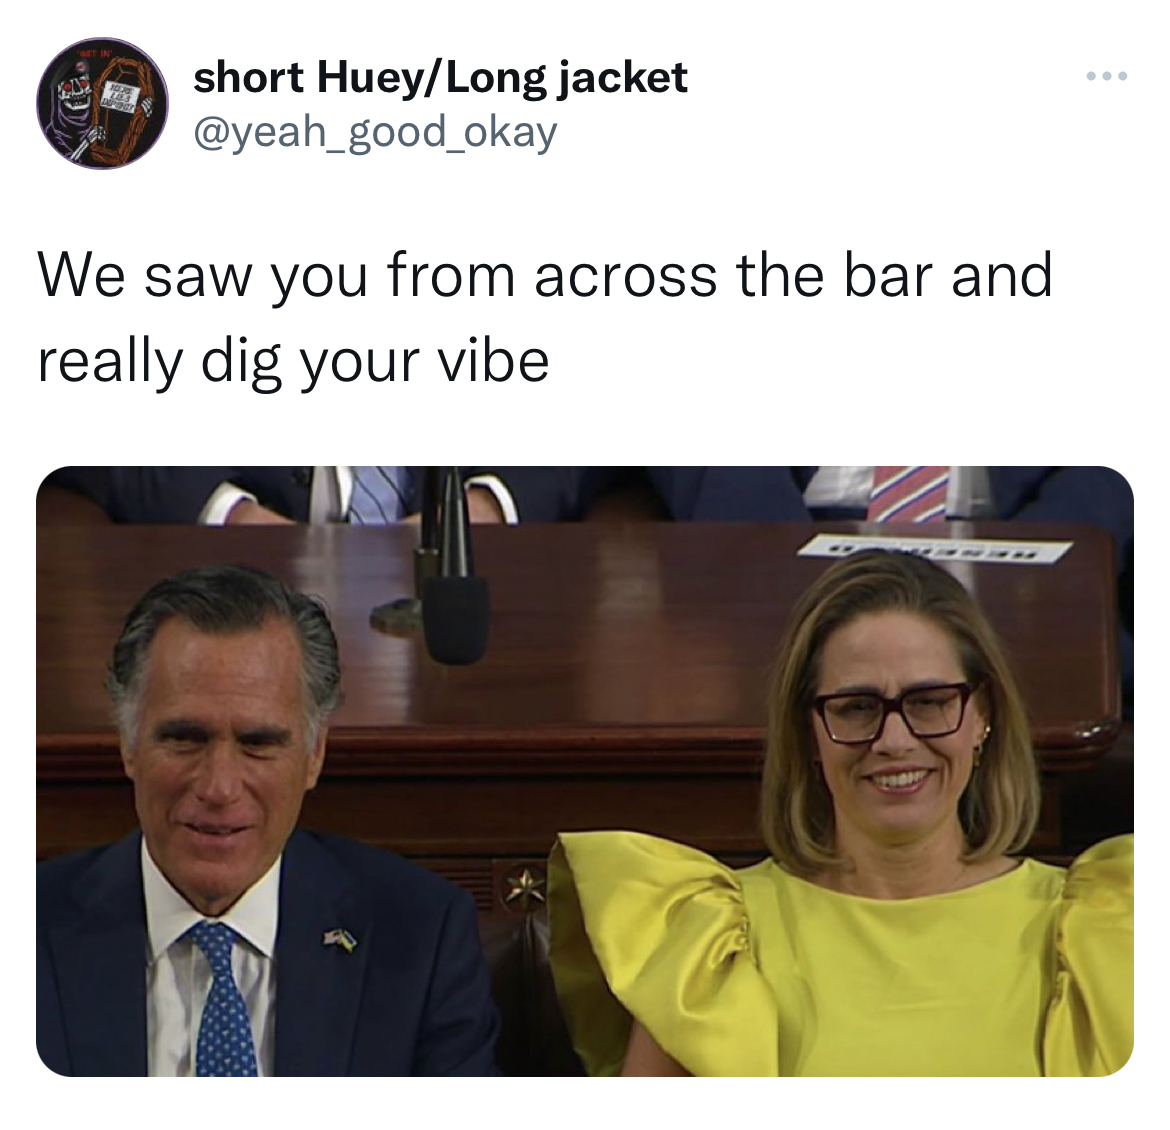 swinger memes across the bar - preentation - short HueyLong jacket We saw you from across the bar and really dig your vibe